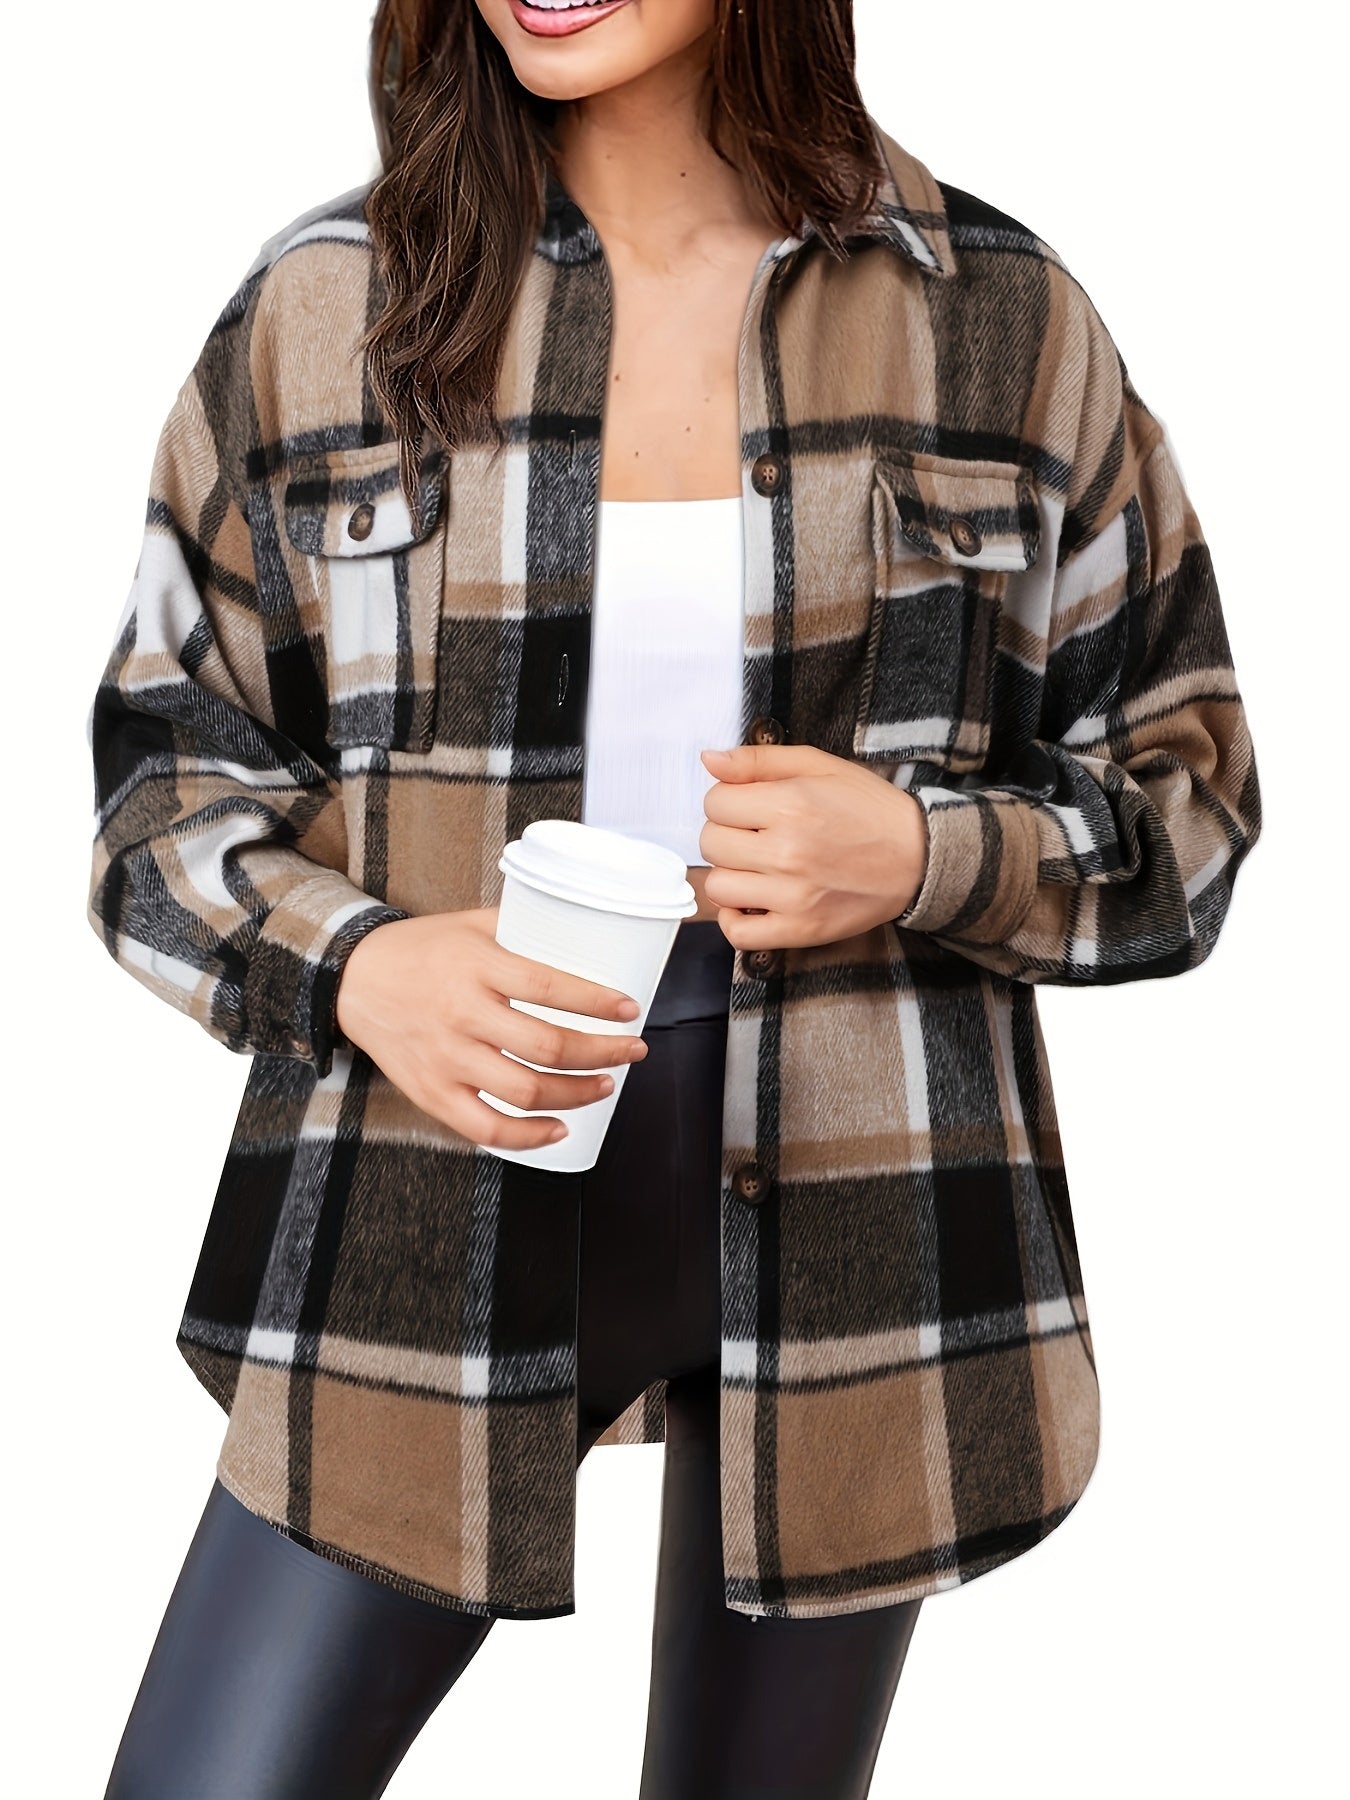 Elegant and Trendy: Women's Slim - Fit Wool Plaid Coat for Autumn and Winter - CasualFlowshop